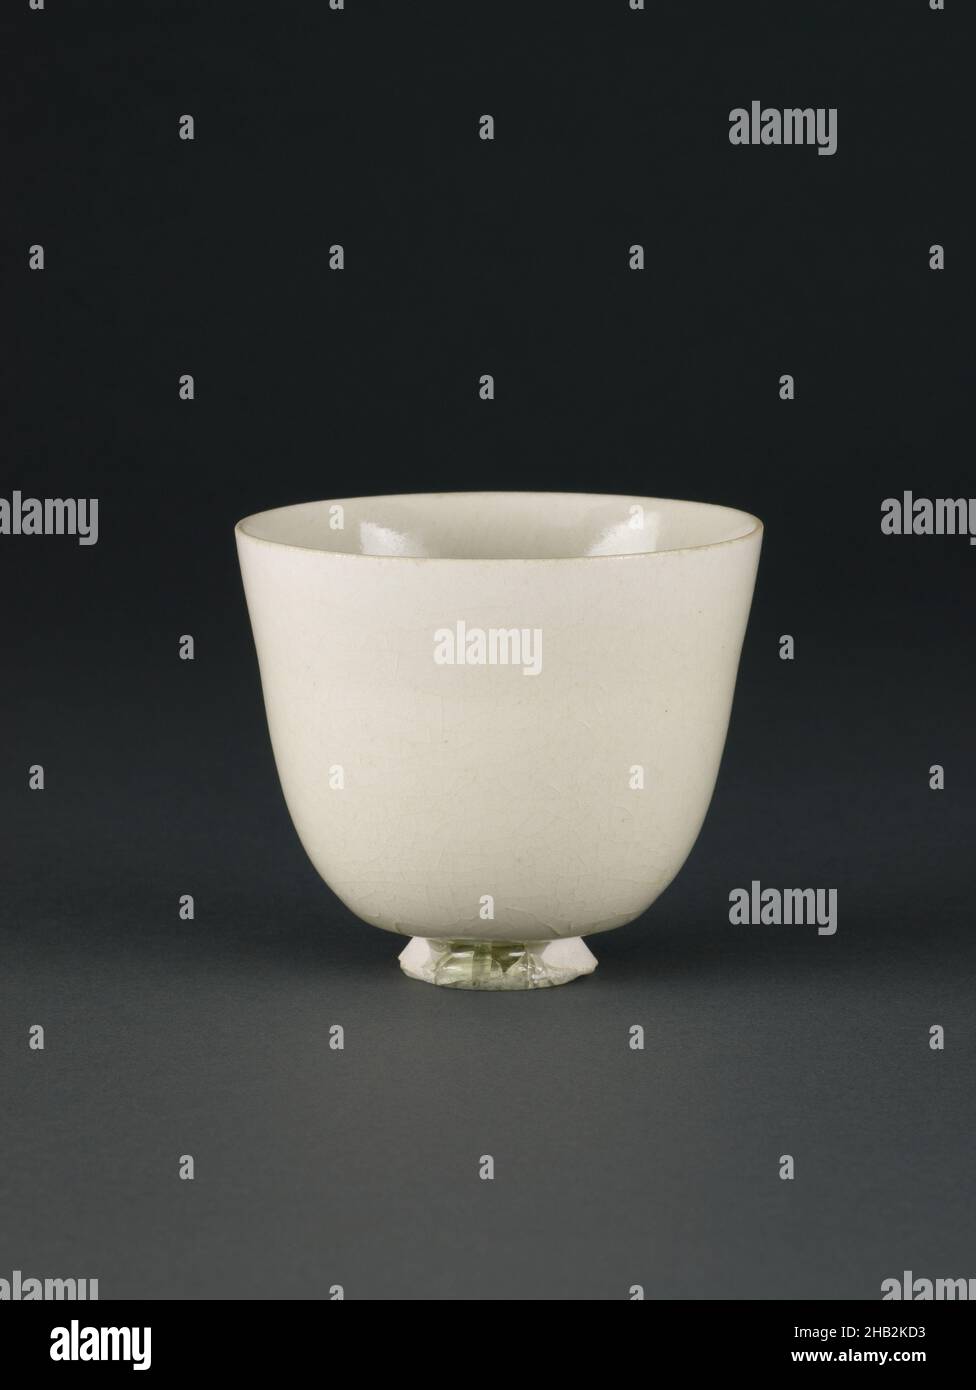 Wine Cup, Chinese, Sui dynasty, 581–618, or Tang dynasty, 618–907, 7th century, Xing ware; porcelain with clear crackled glaze, Hebei province, China, Asia, Ceramics, containers, 3 1/2 in. x 3 in. (8.9 x 7.6 cm Stock Photo